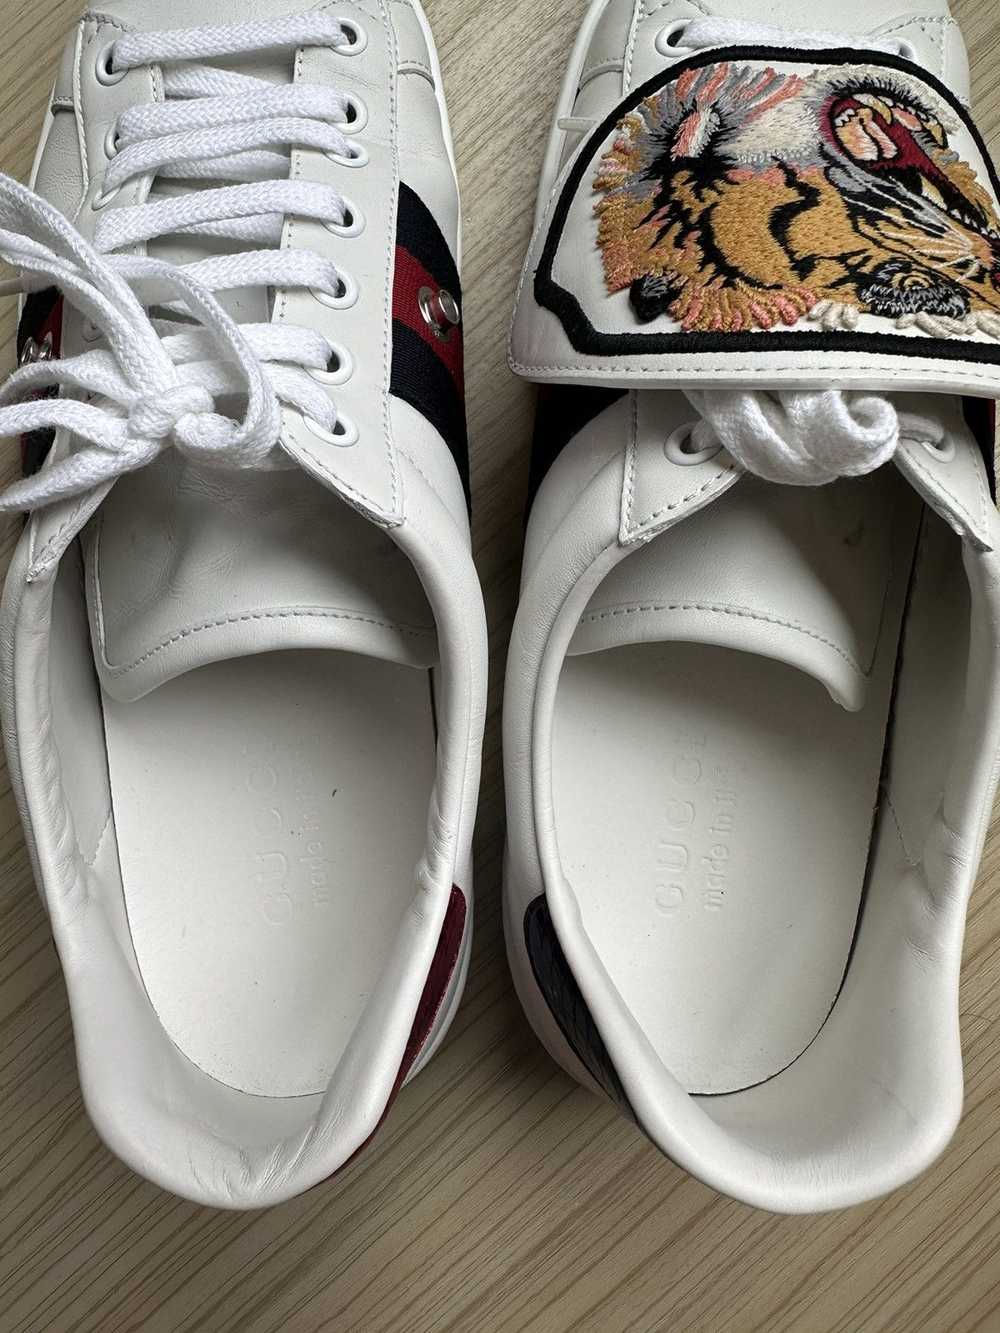 Gucci Gucci Ace Sneakers with Removable Patches - image 4